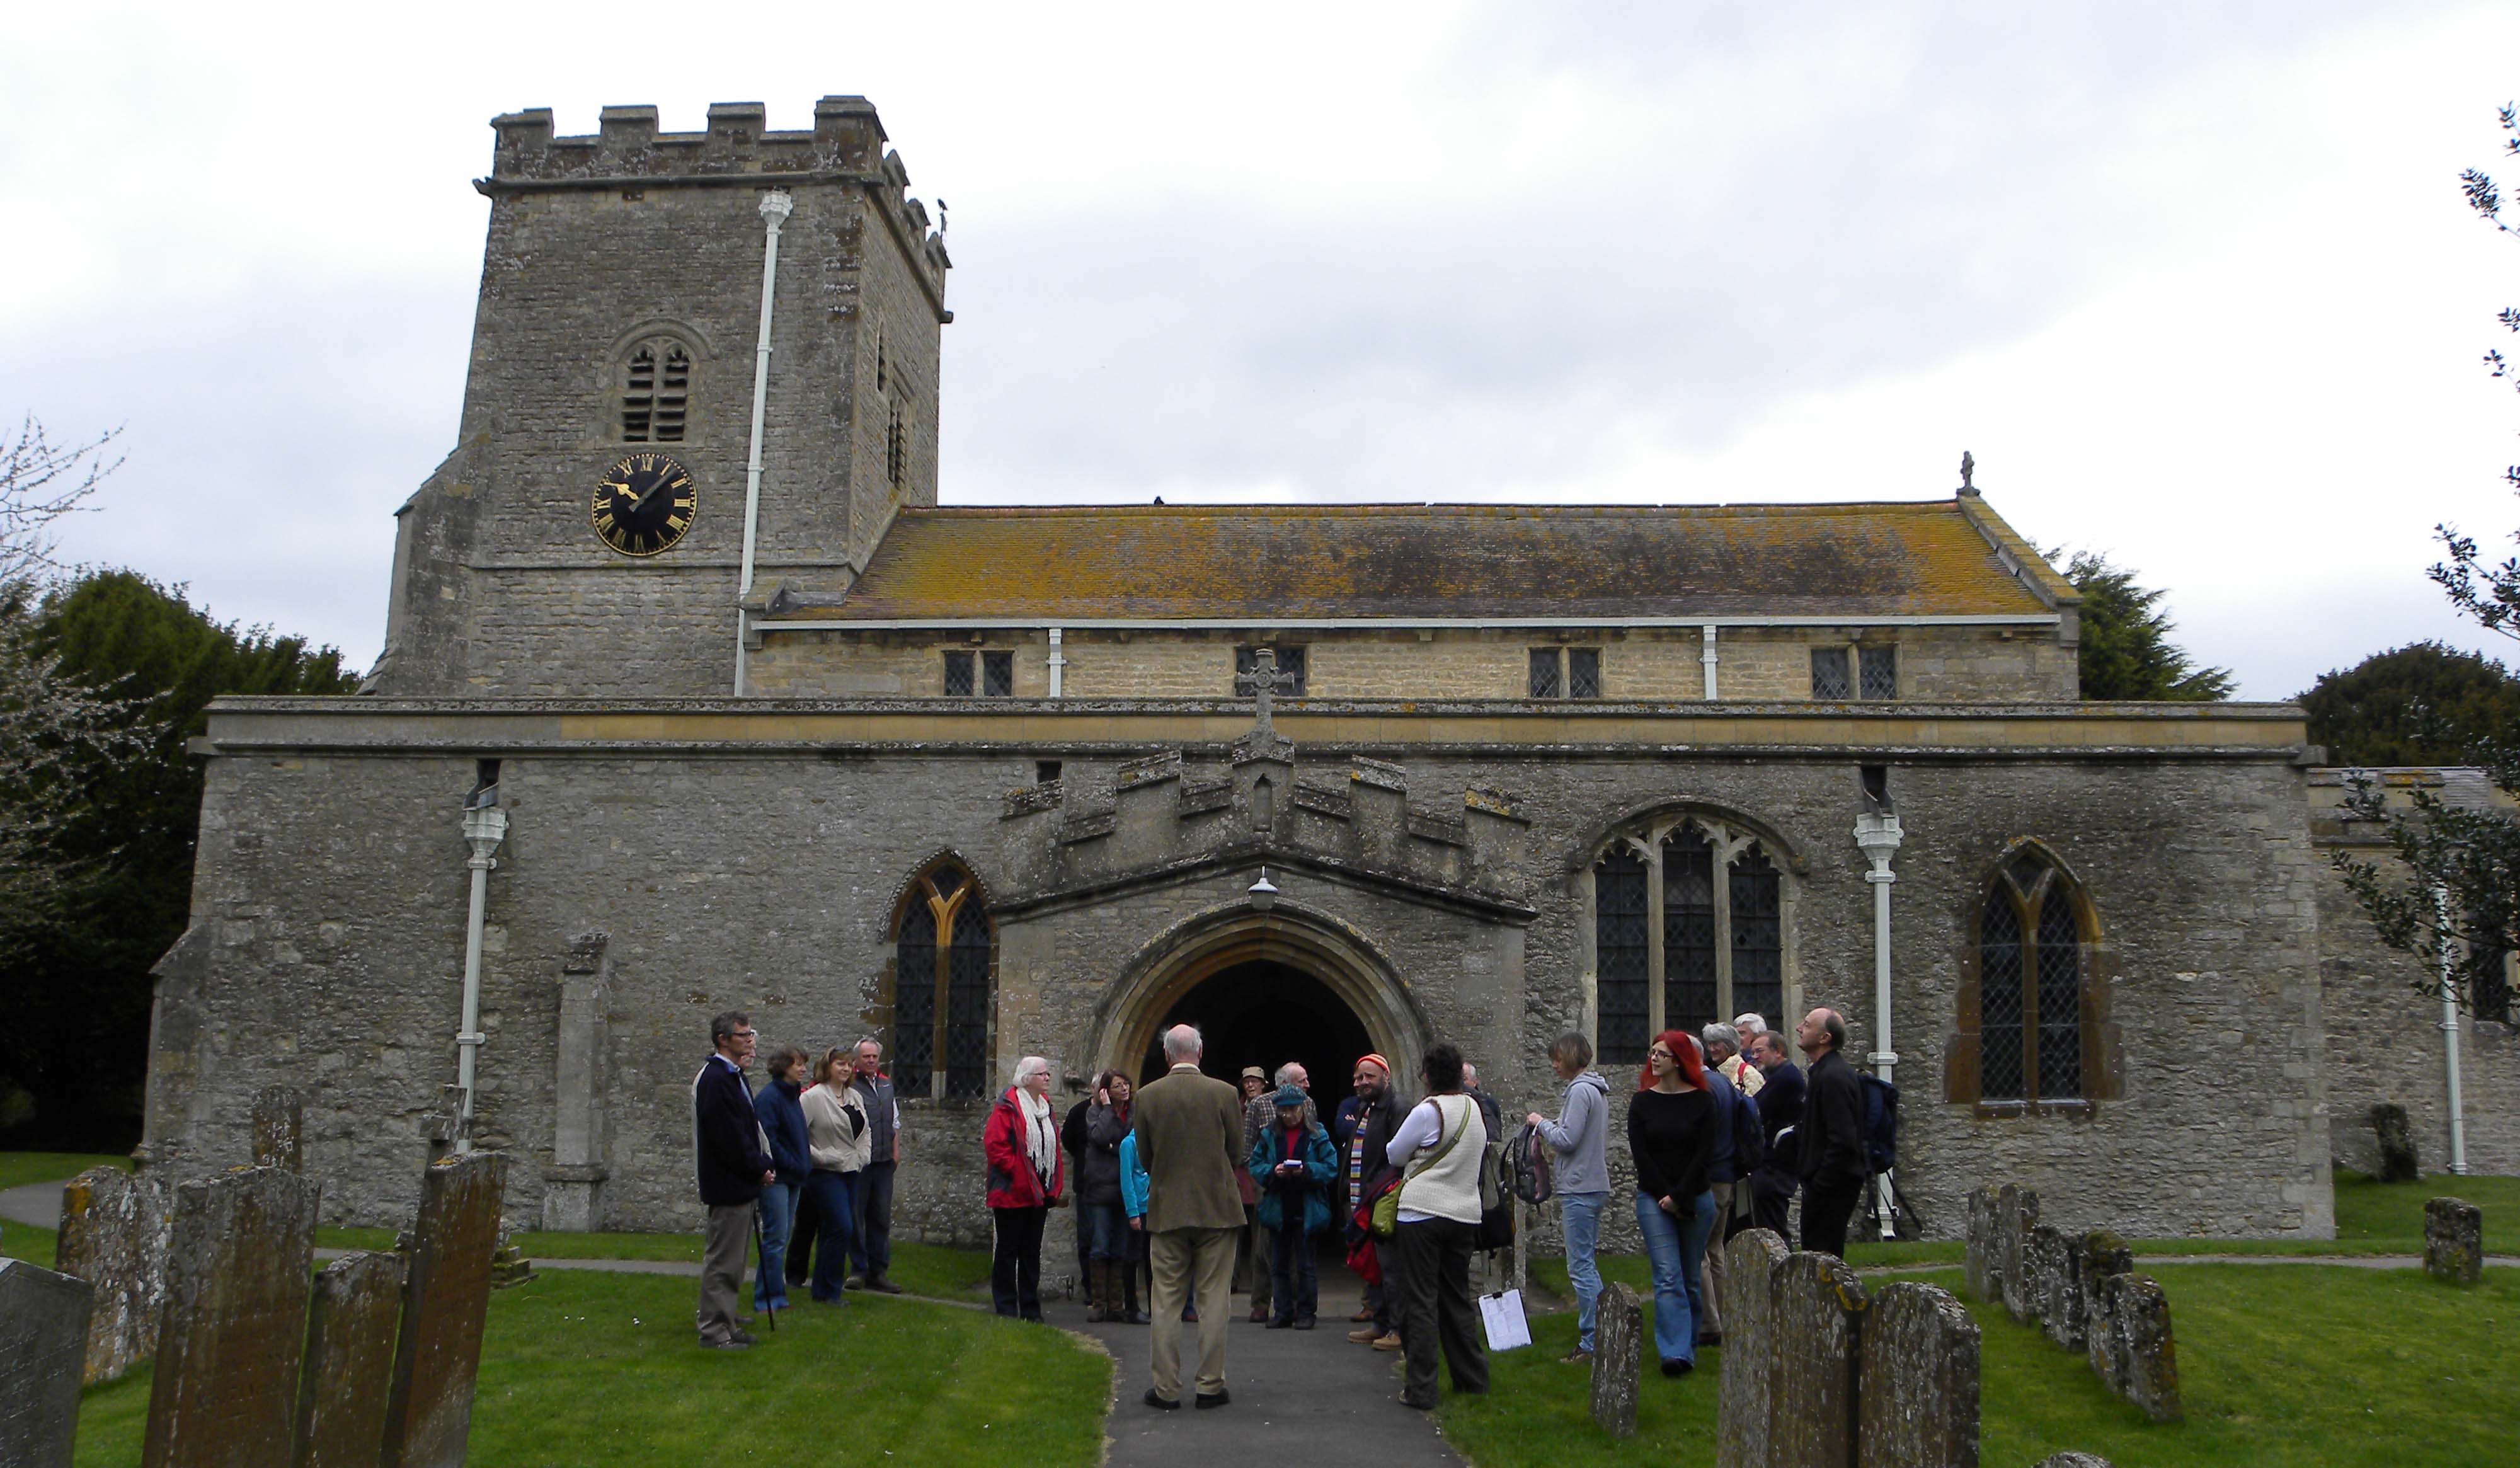 The survey group outside St Mary's, Twyford